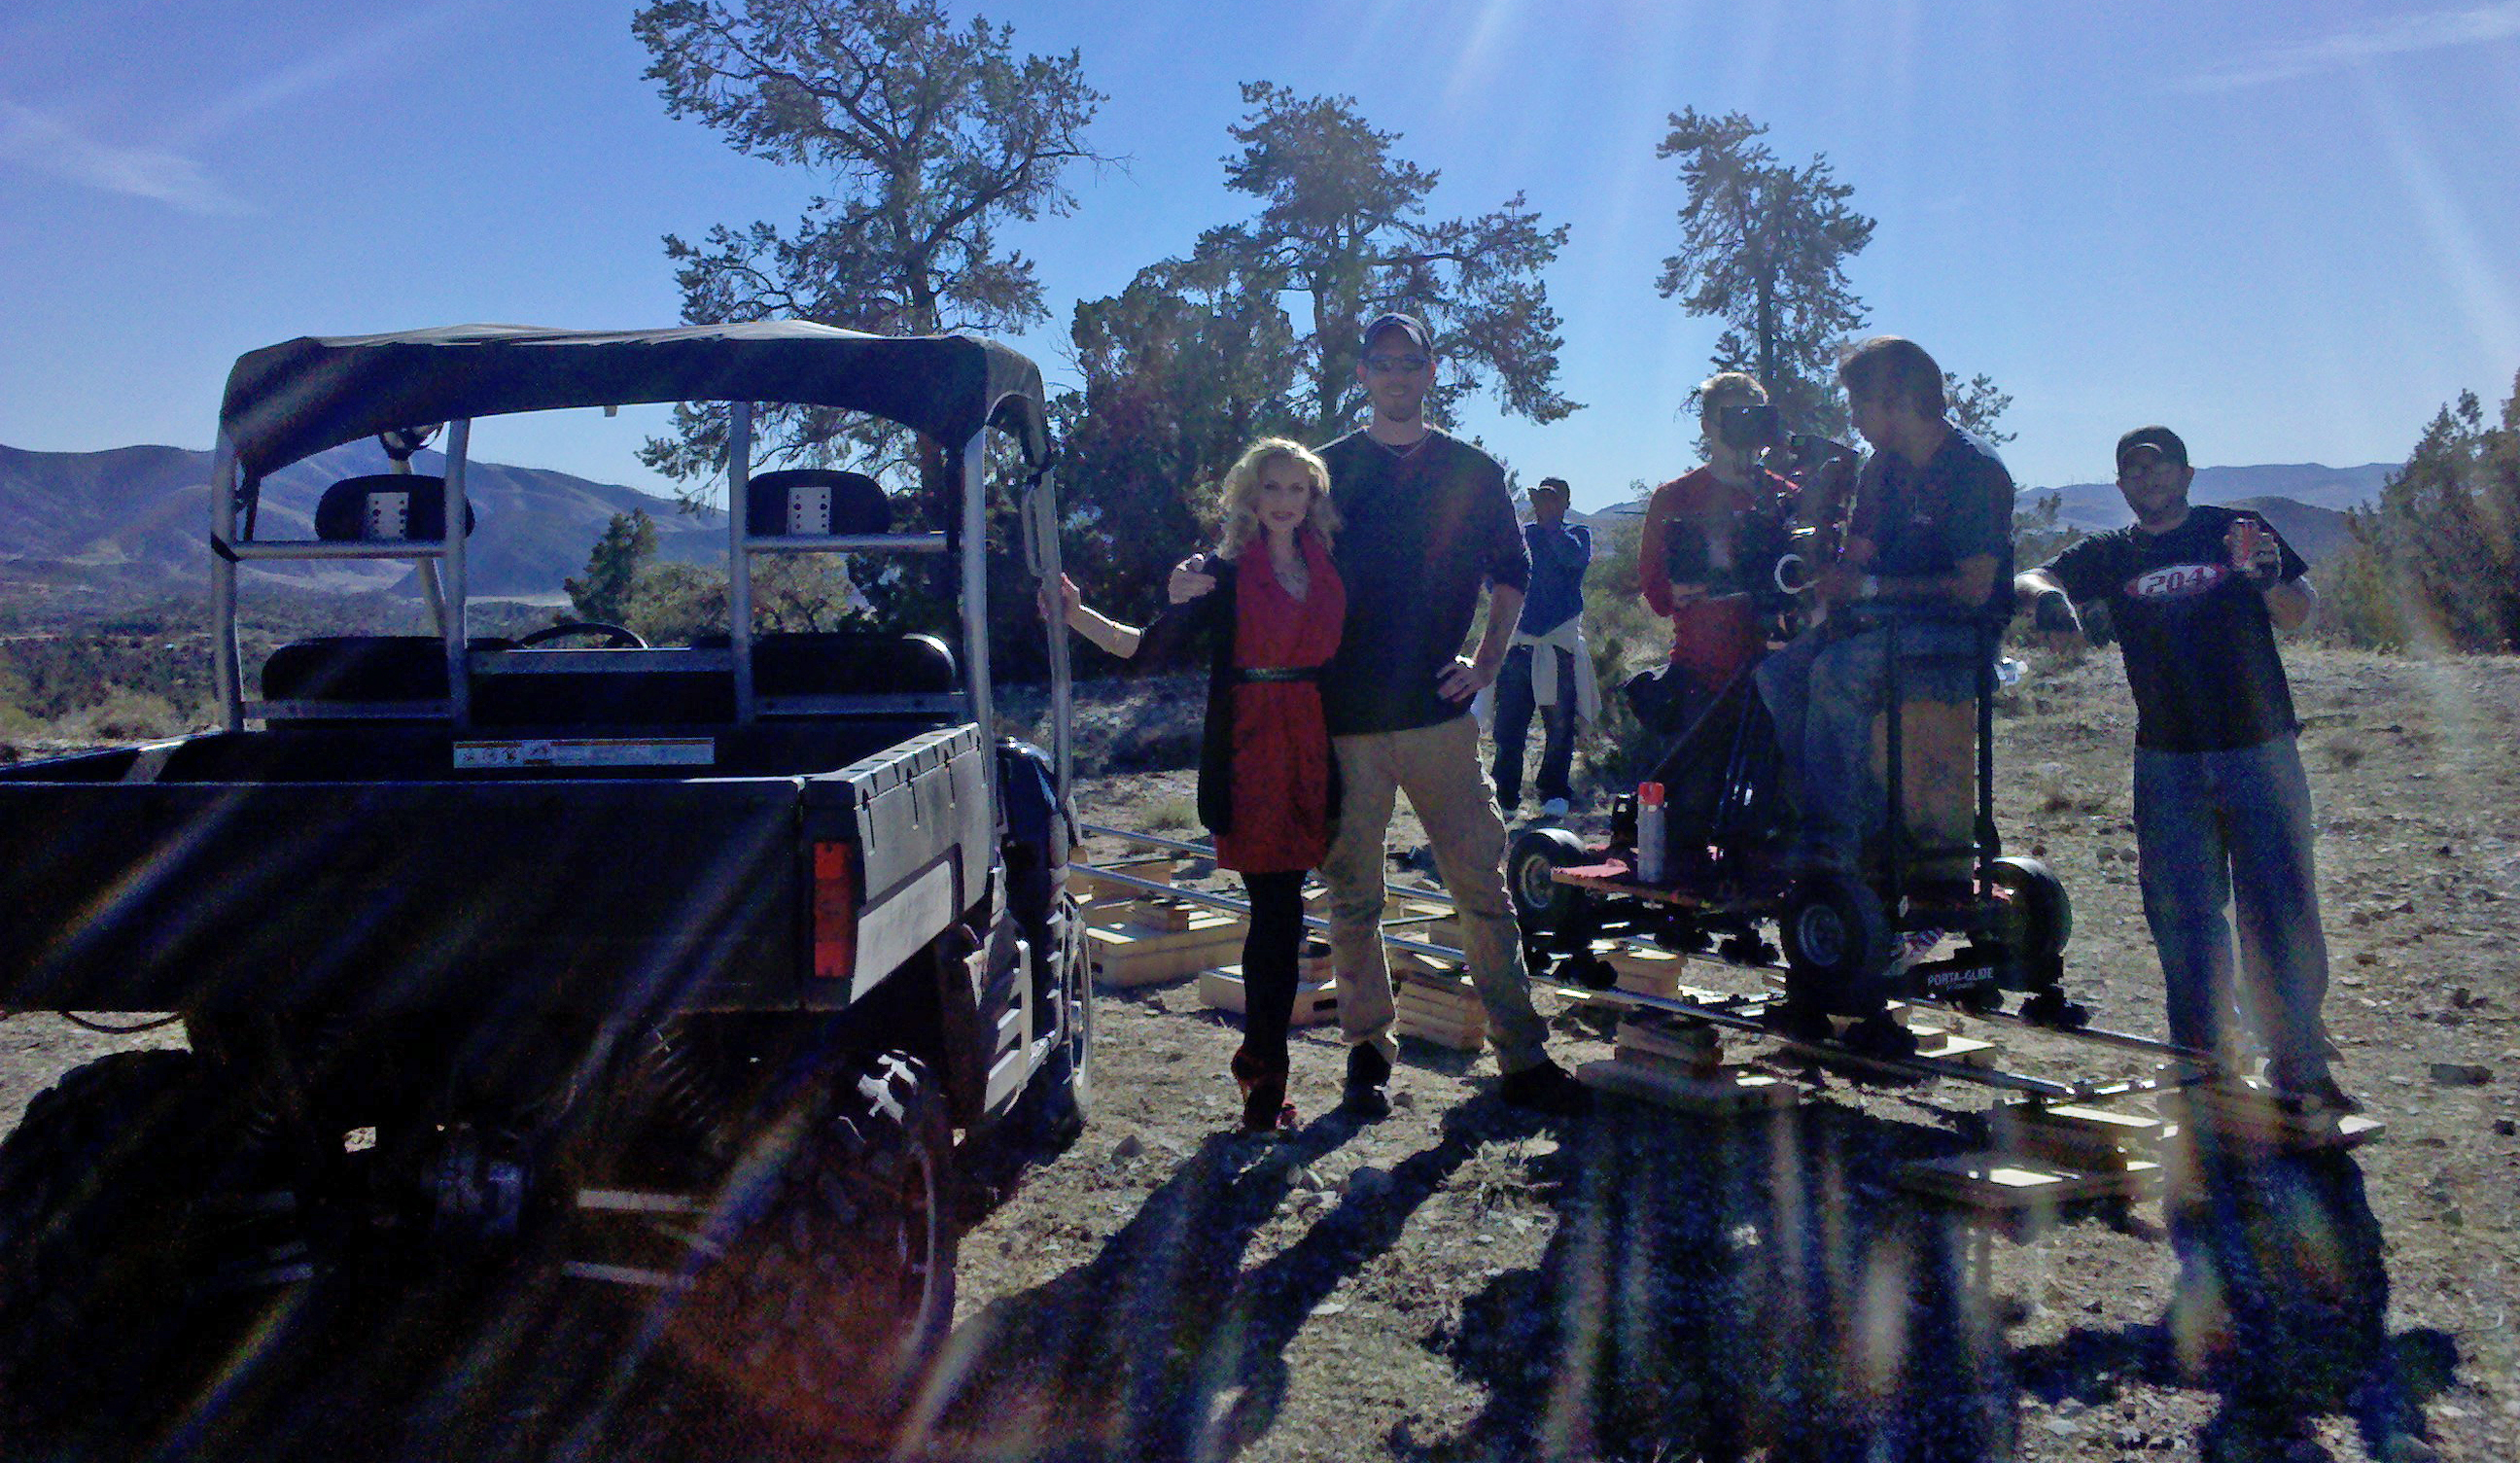 Director (and husband) Chris Armstrong takes a moment for a picture with his wife Jenn Gotzon on set of God's Country